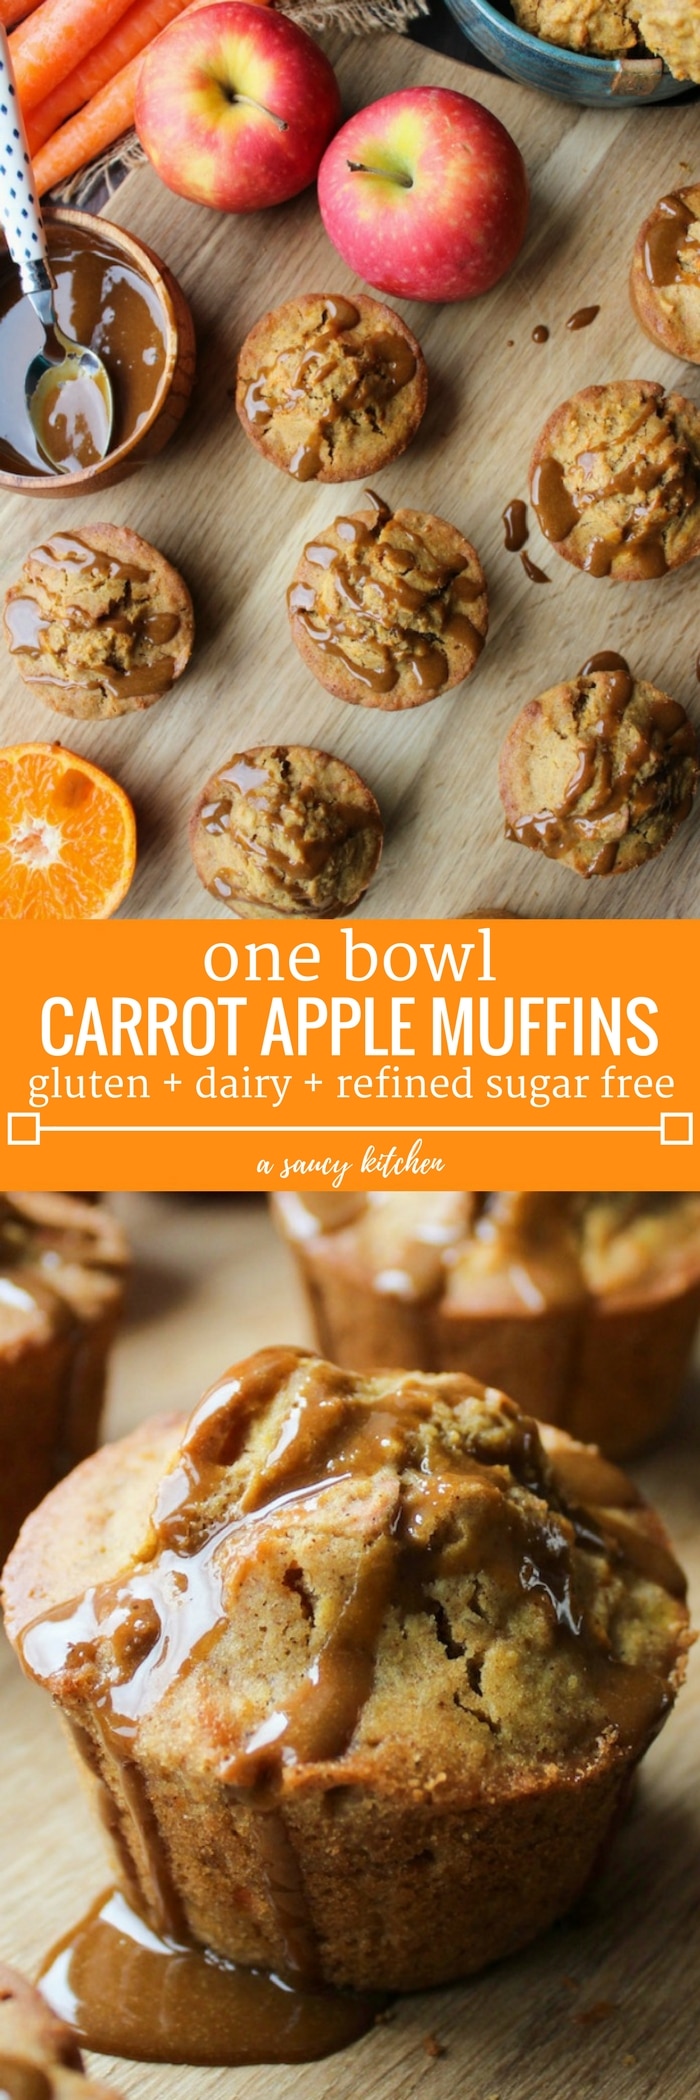 carrot apple muffins with flaxseed